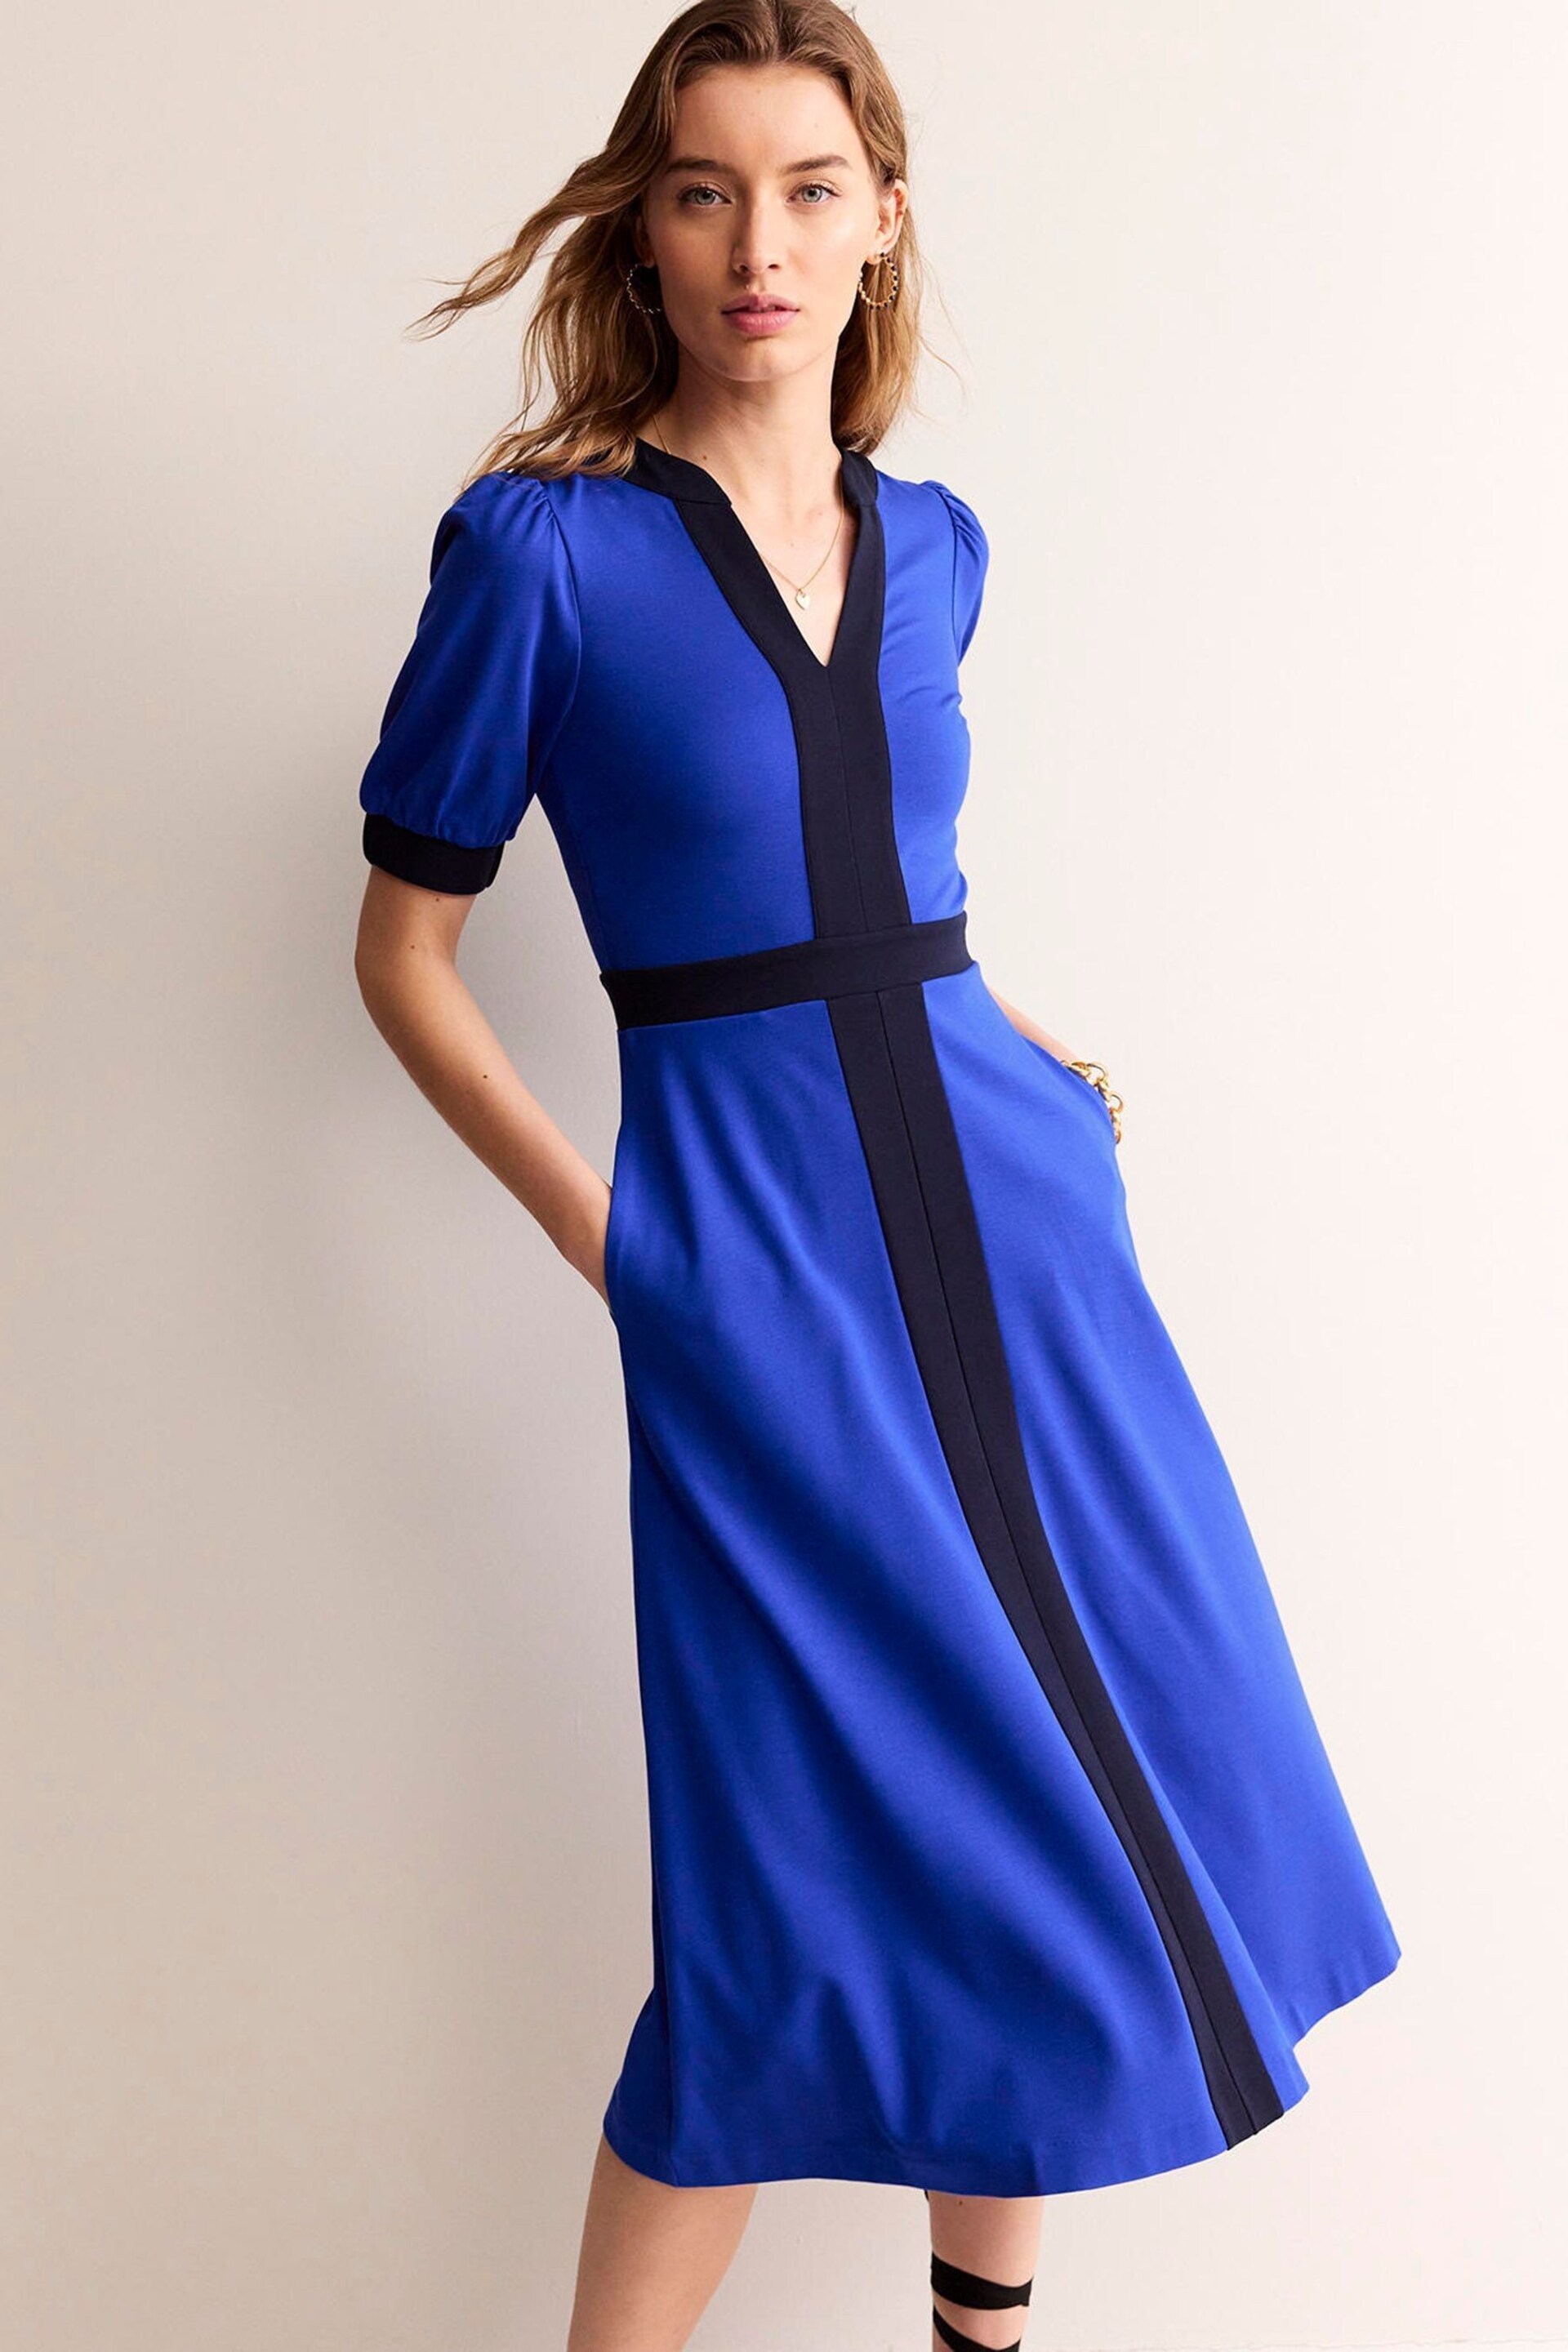 Boden Blue Petra Puff Sleeve Ponte Dress - Image 4 of 5